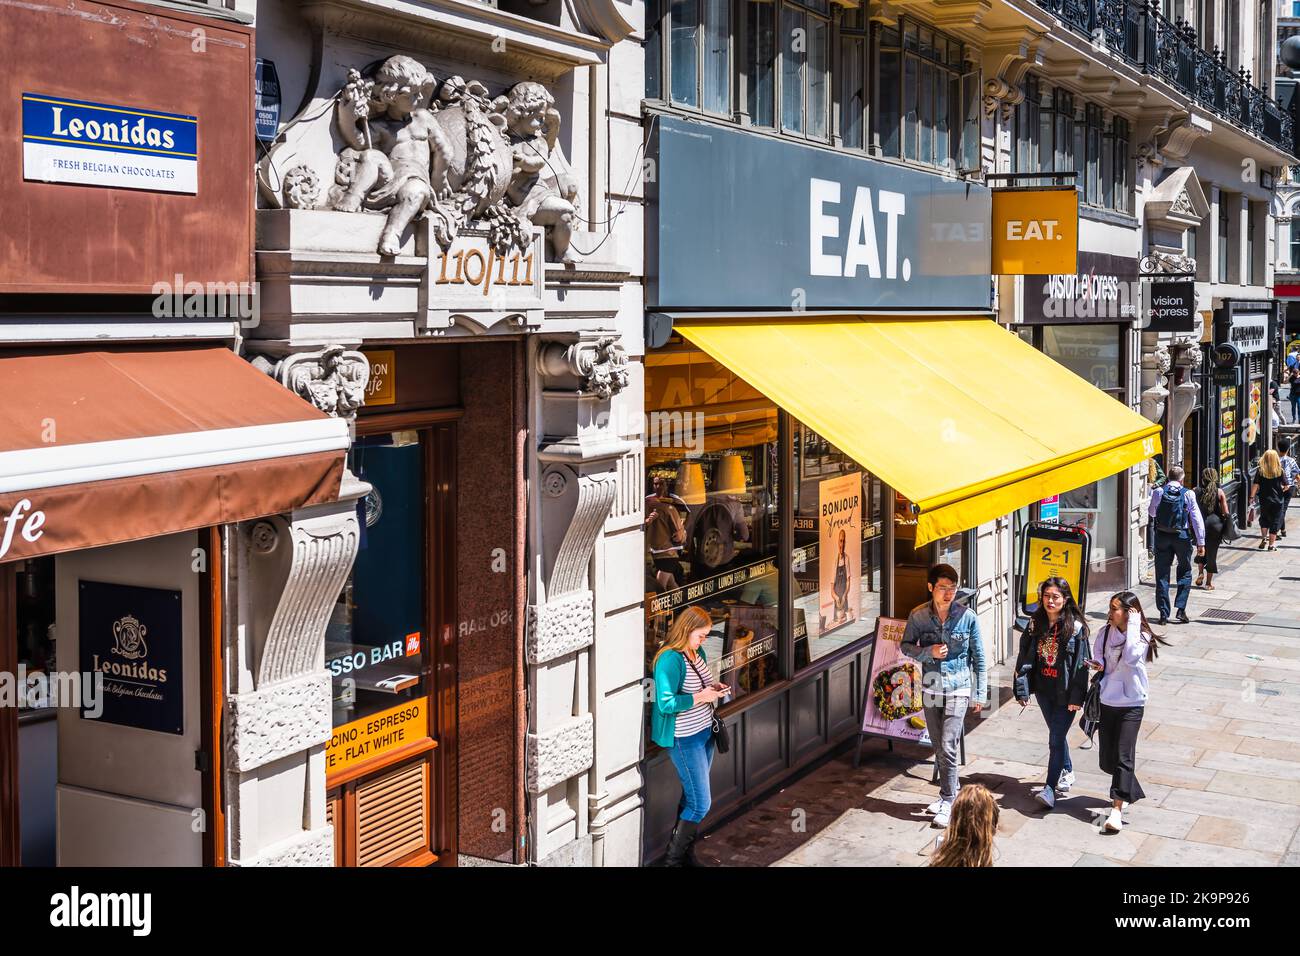 London, United Kingdom - June 22, 2018: Above view on Fleet street with people walking by Eat. sandwich store shop restaurant or cafe in summer Stock Photo